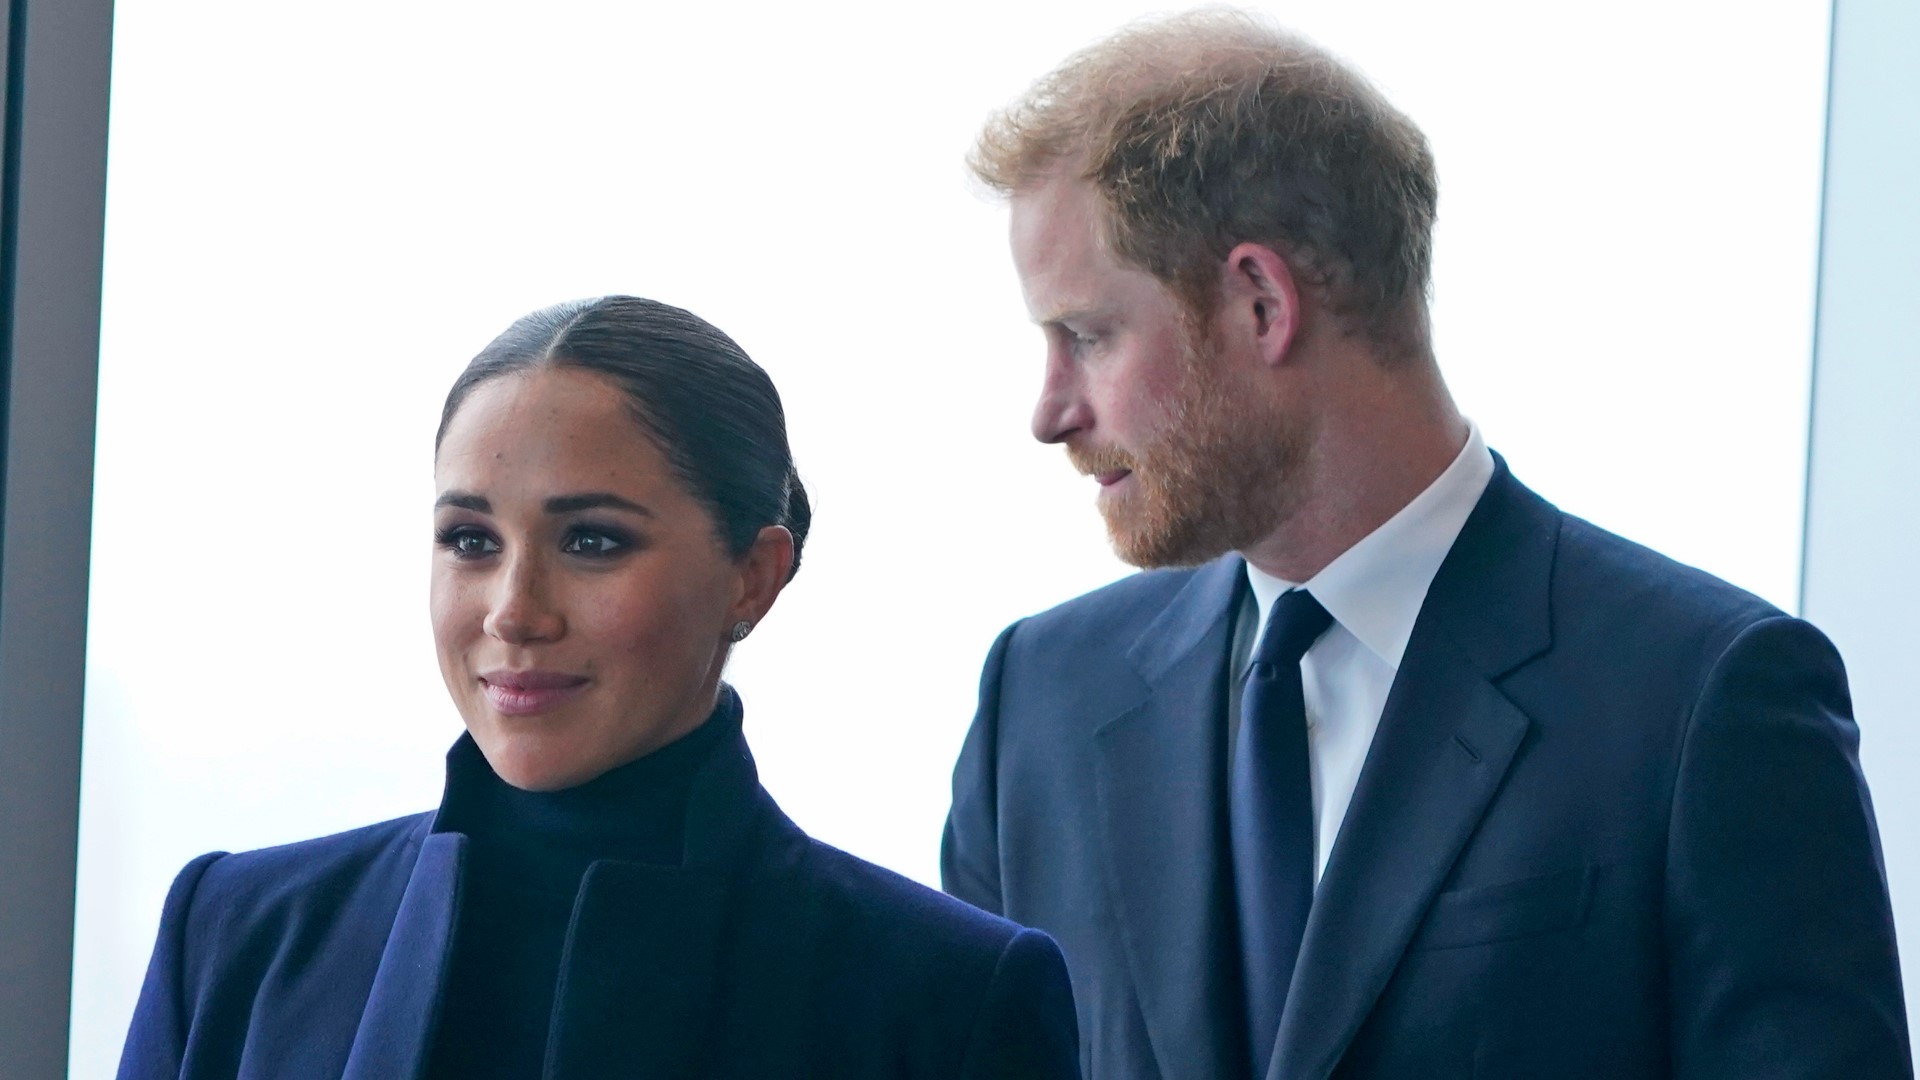 A spokesperson for Prince Harry and his wife Meghan says the couple were involved in a car chase Tuesday night while being followed by photographers in New York.